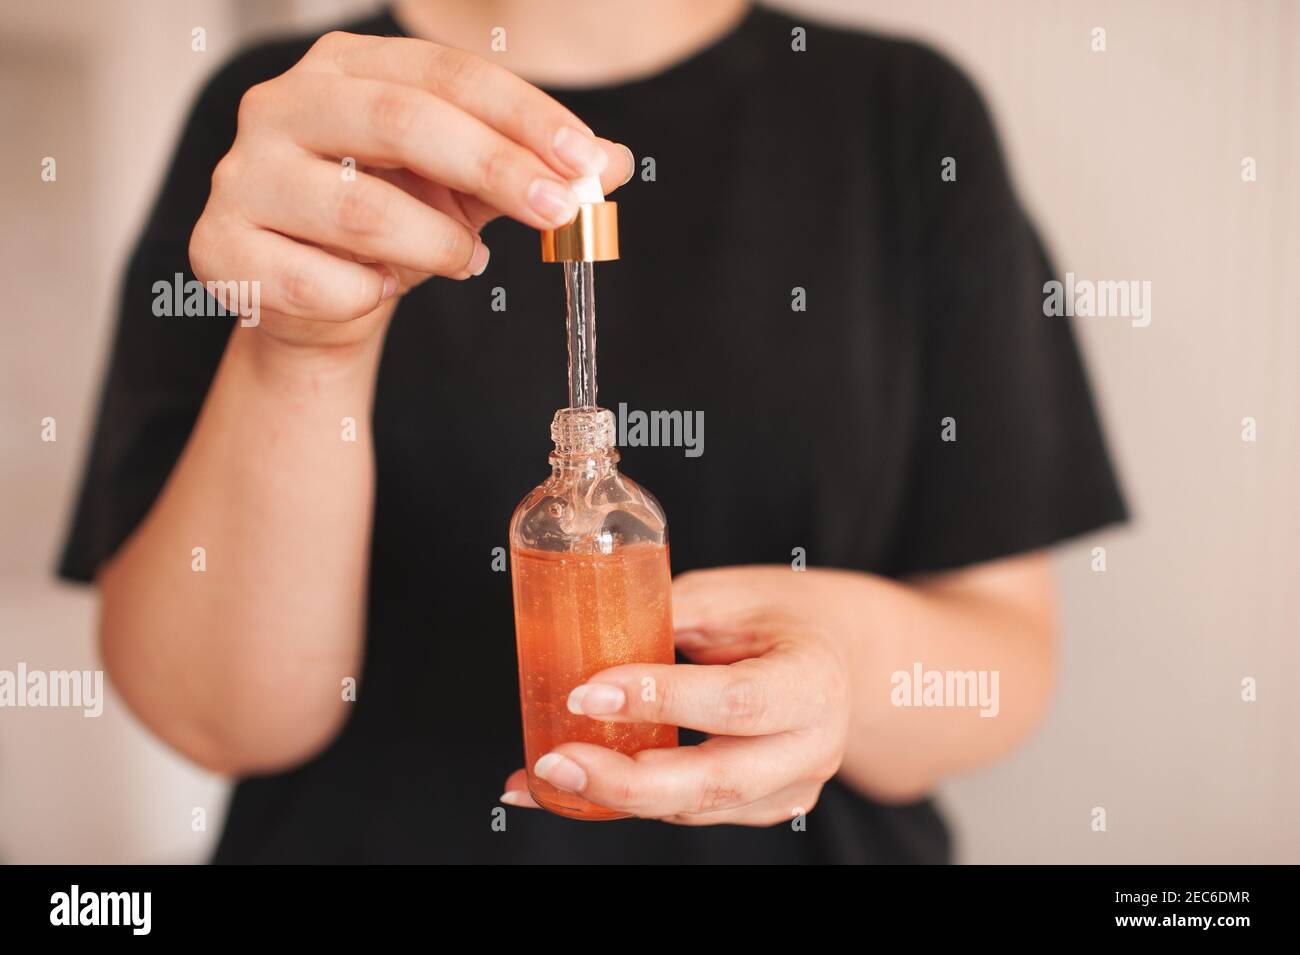 Woman holding moisturizing facial serum in glass bottle close up. Skin health care. Healthy lifestyle. Stock Photo